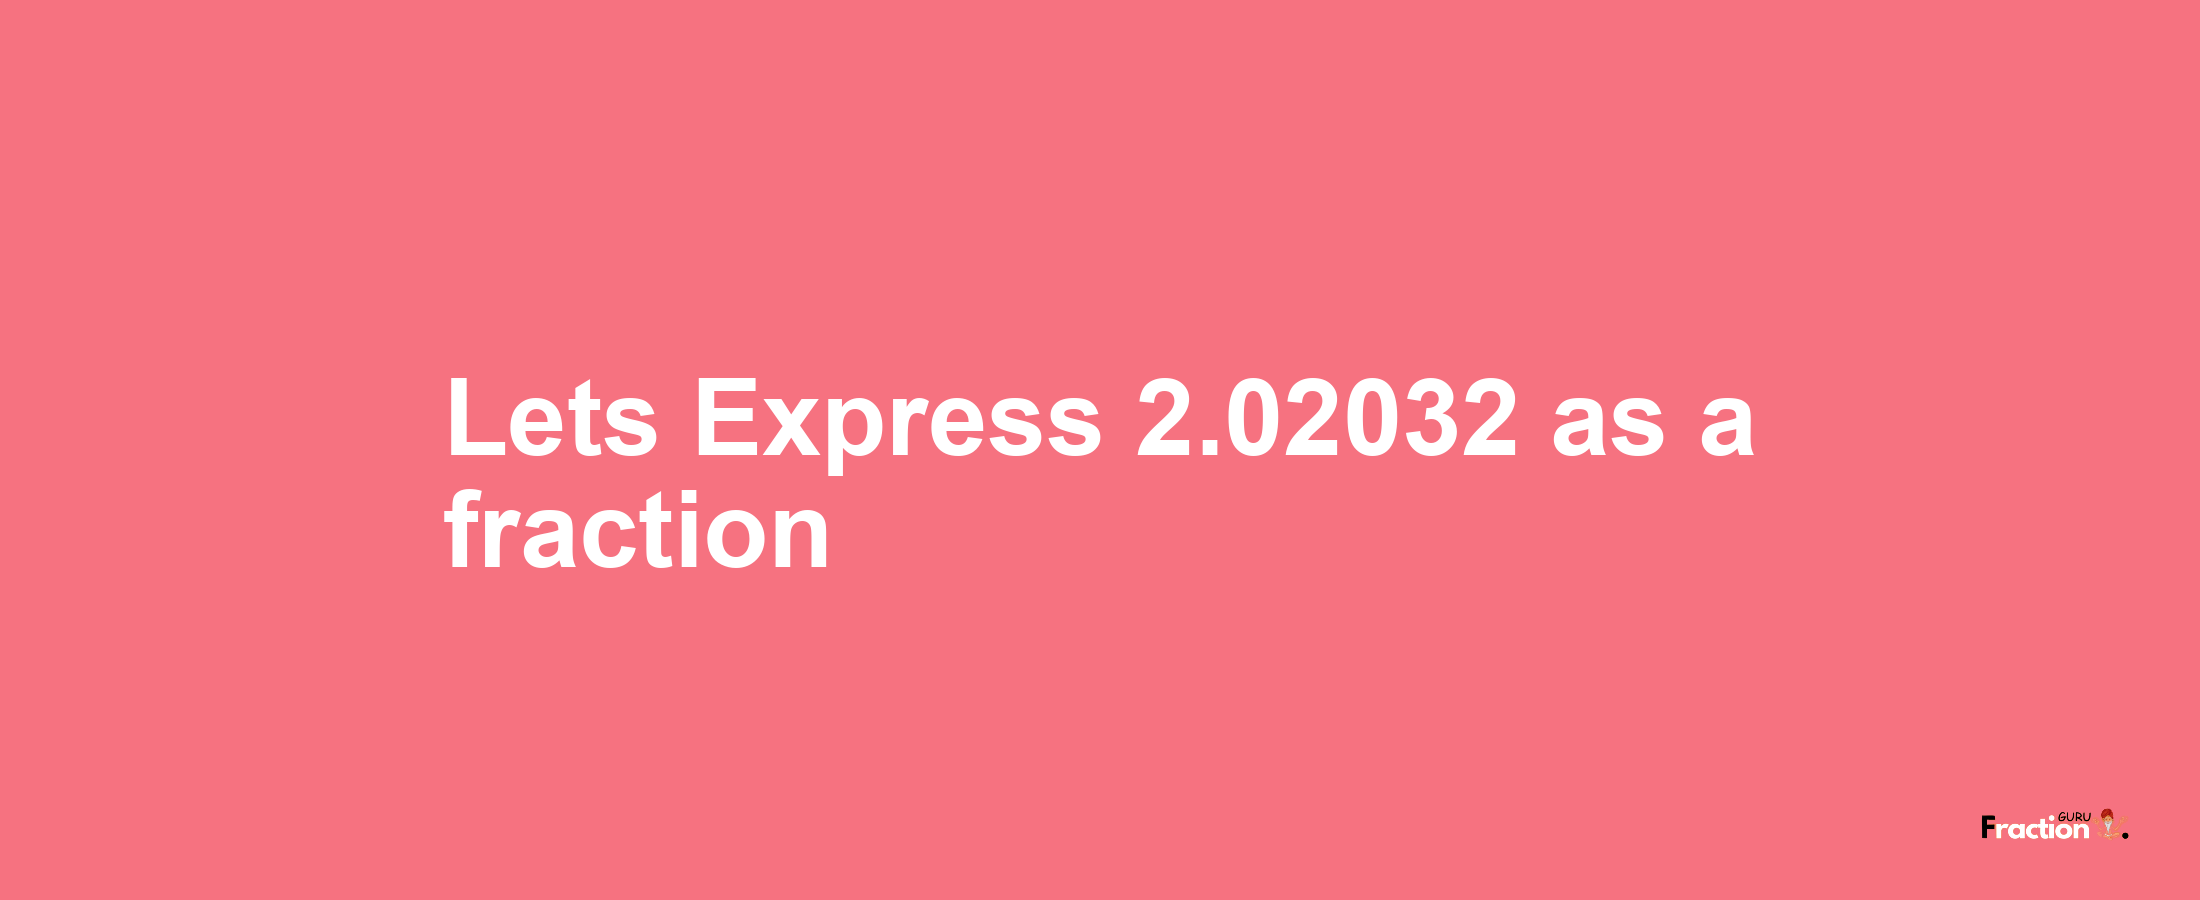 Lets Express 2.02032 as afraction